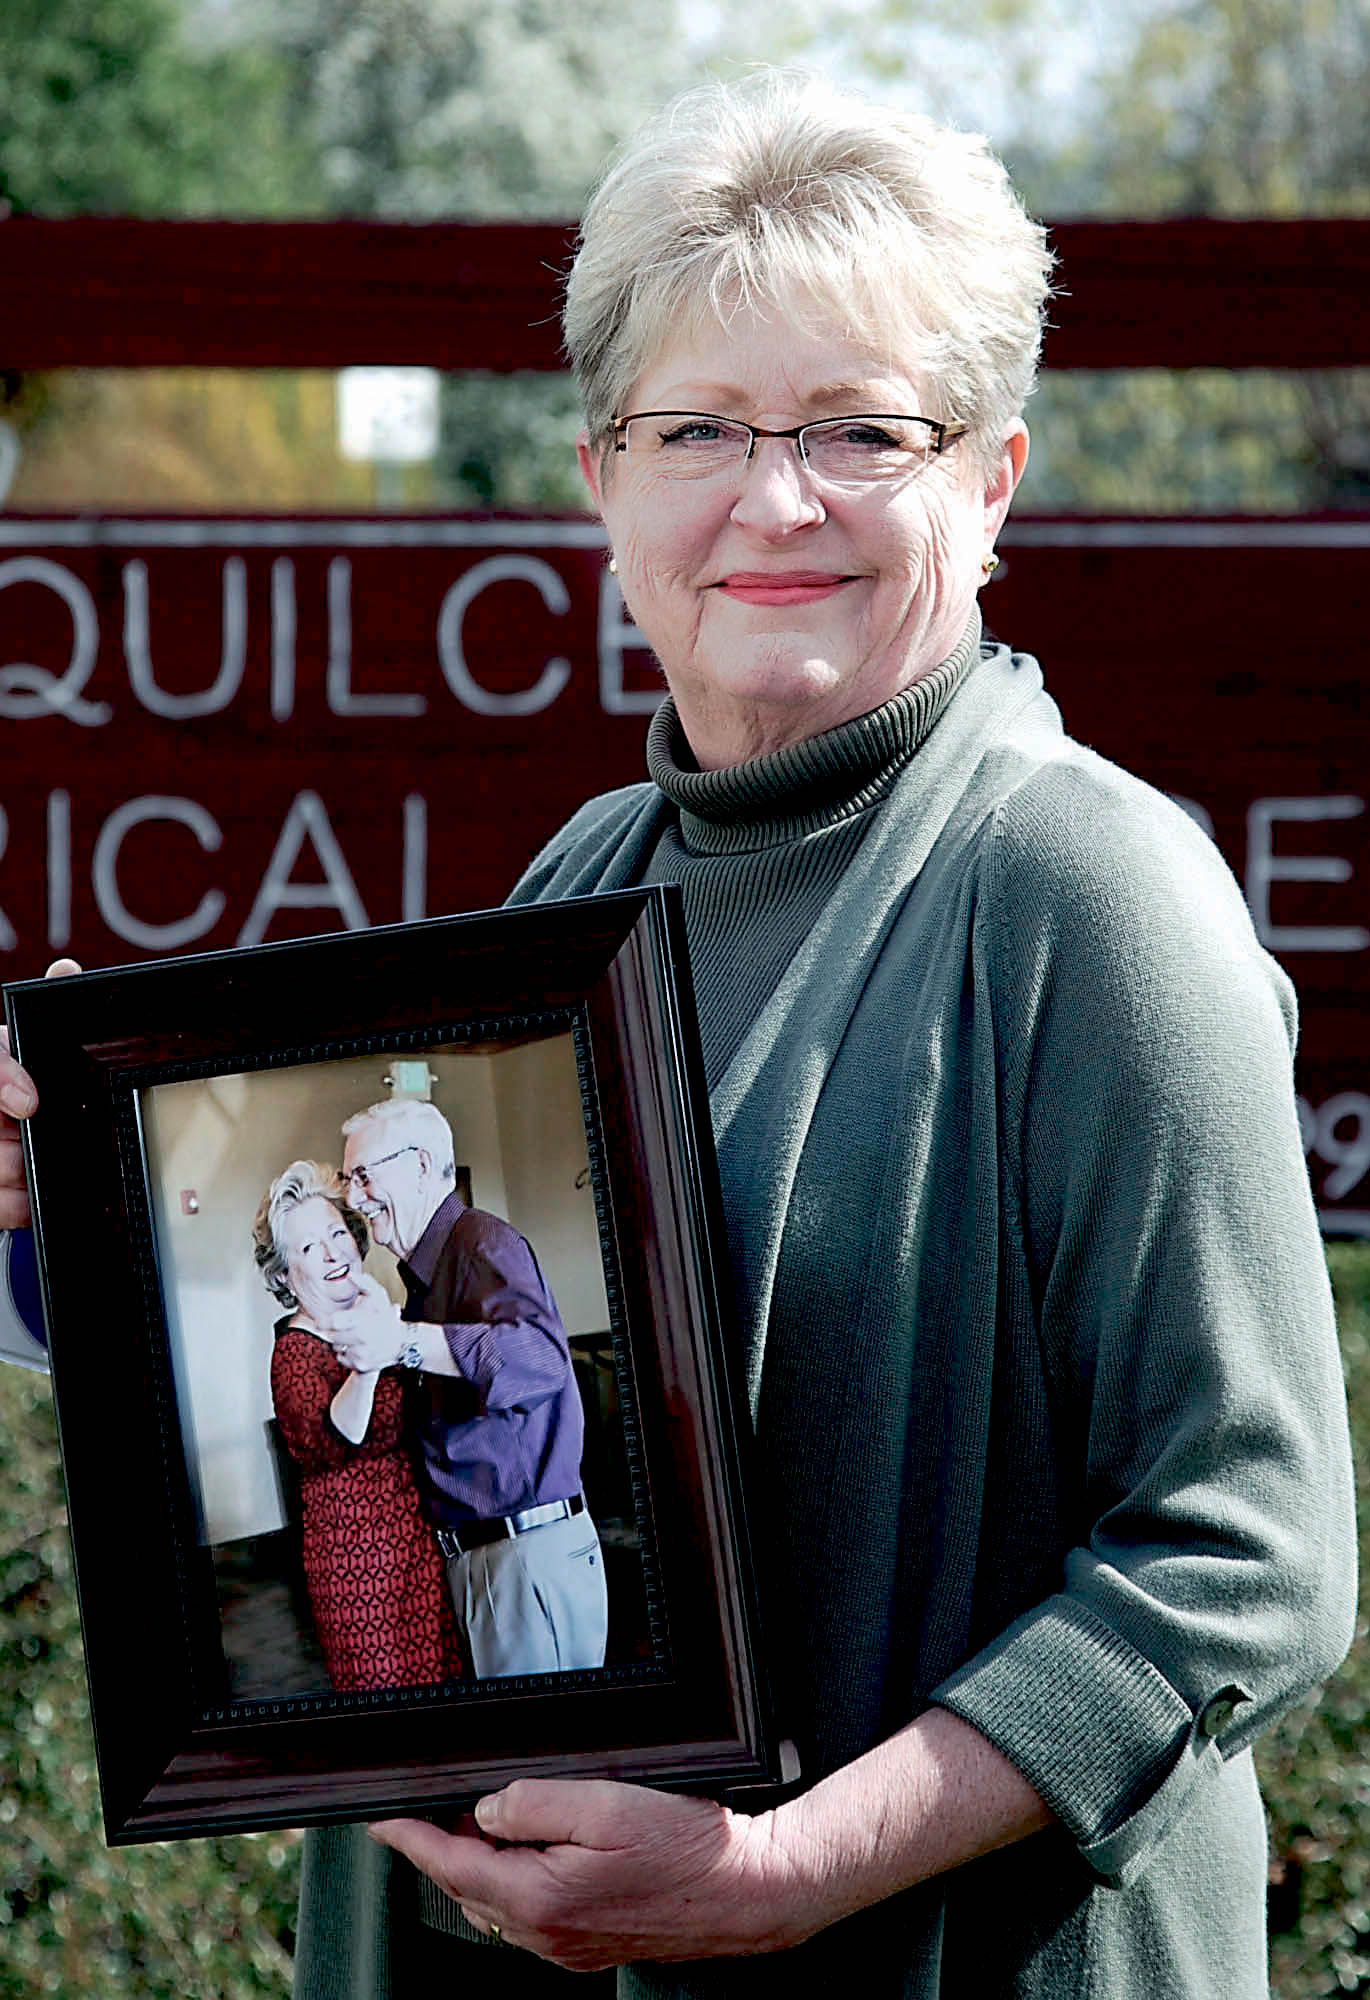 Carol Christiansen holds a photo of her dancing with her husband